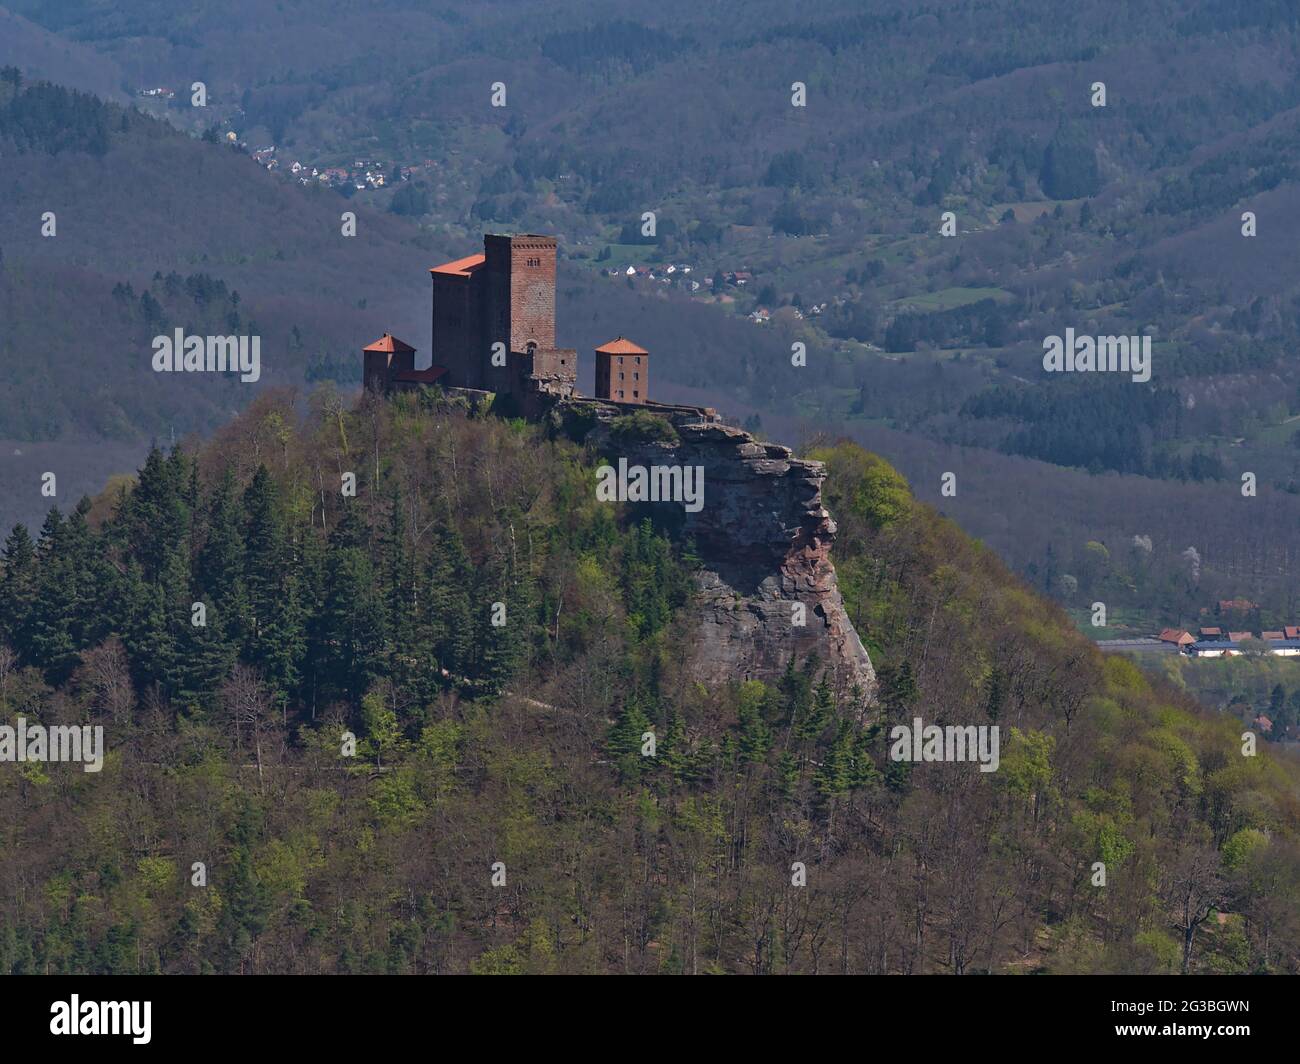 View of historic reconstructed castle Trifels (construction ca. 12th century) located on a rocky sandstone hill in Palatinate Forest near Annweiler. Stock Photo